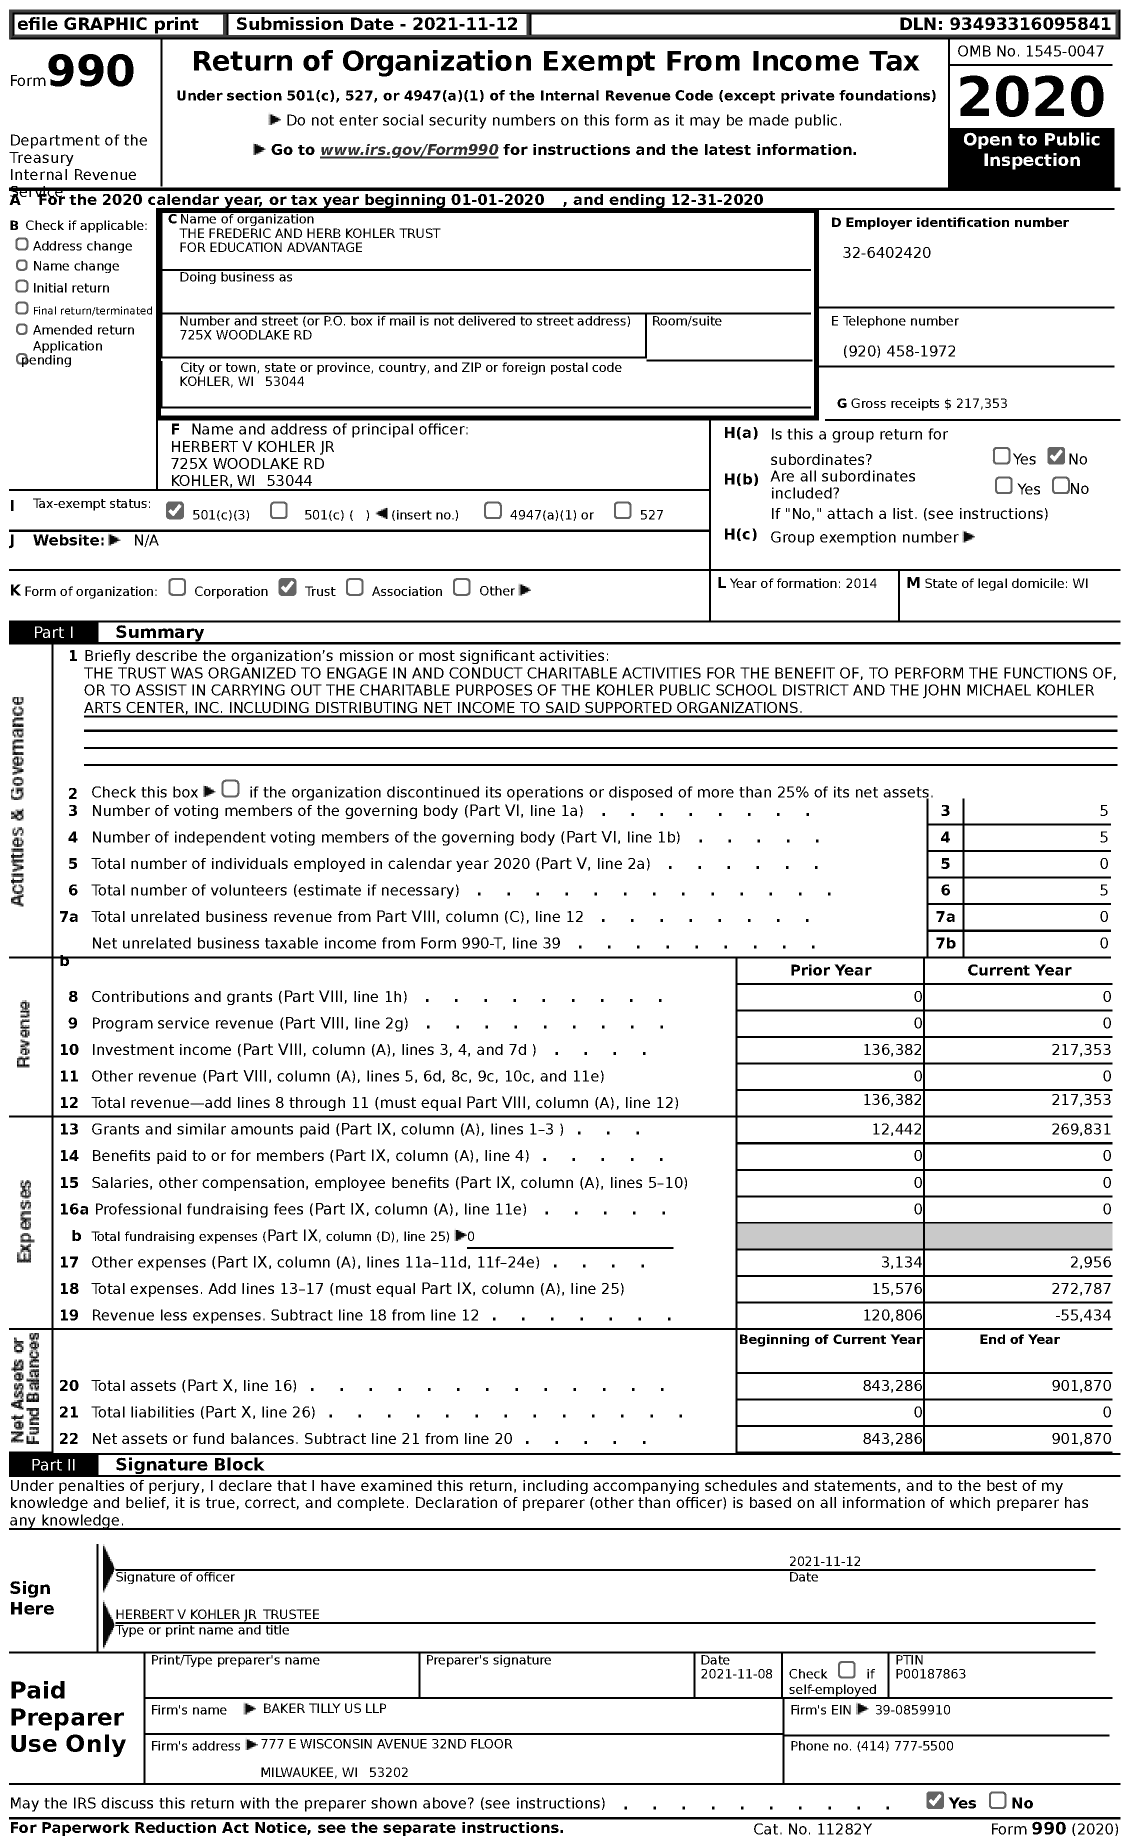 Image of first page of 2020 Form 990 for The Frederic and Herb Kohler Trust for Education Advantage